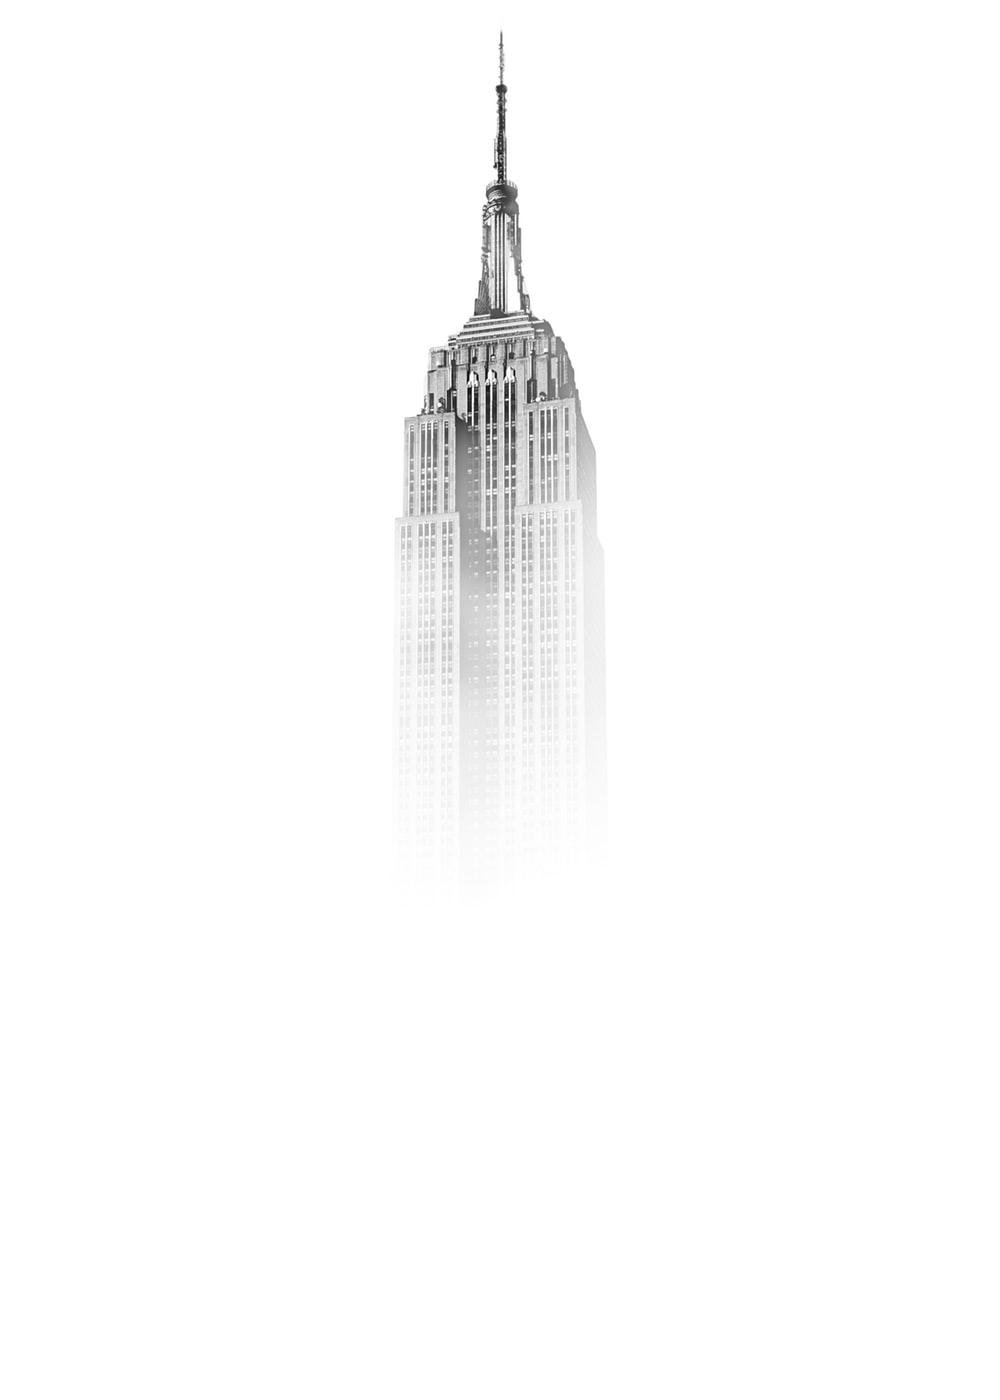 Misty empire state building. HD photo